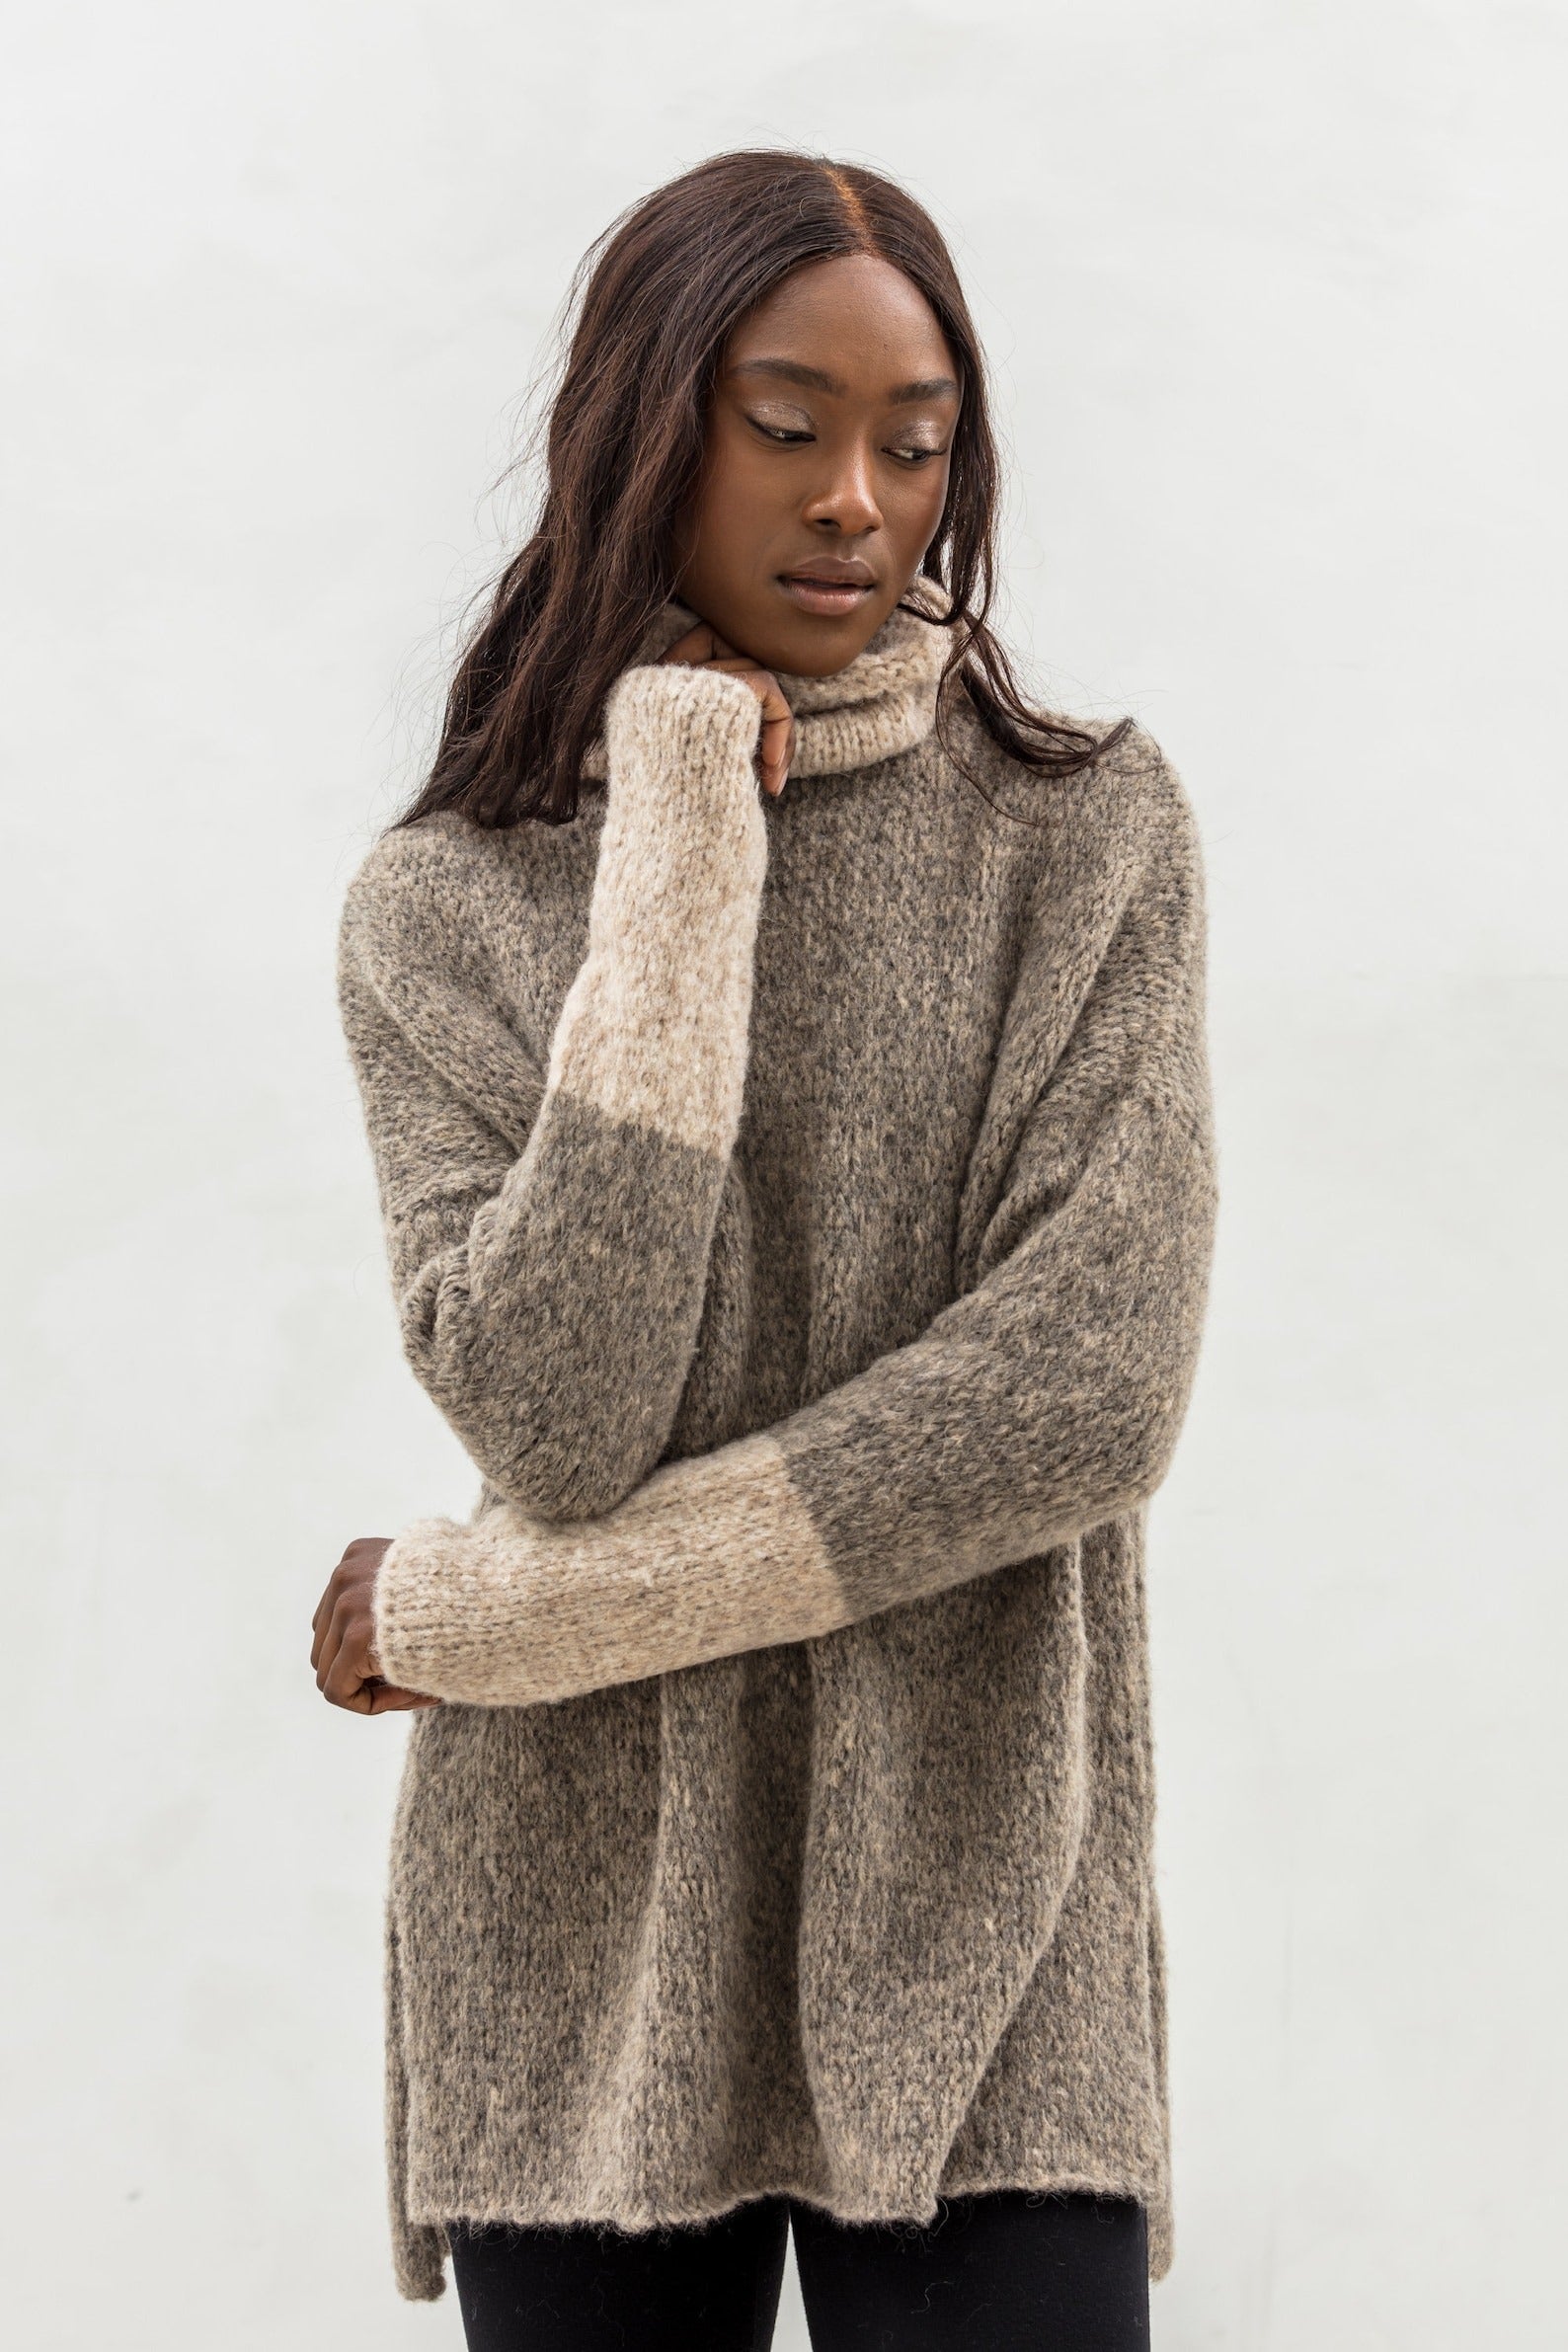 20 Long Sweaters That Pair Perfectly With Your Favorite Leggings